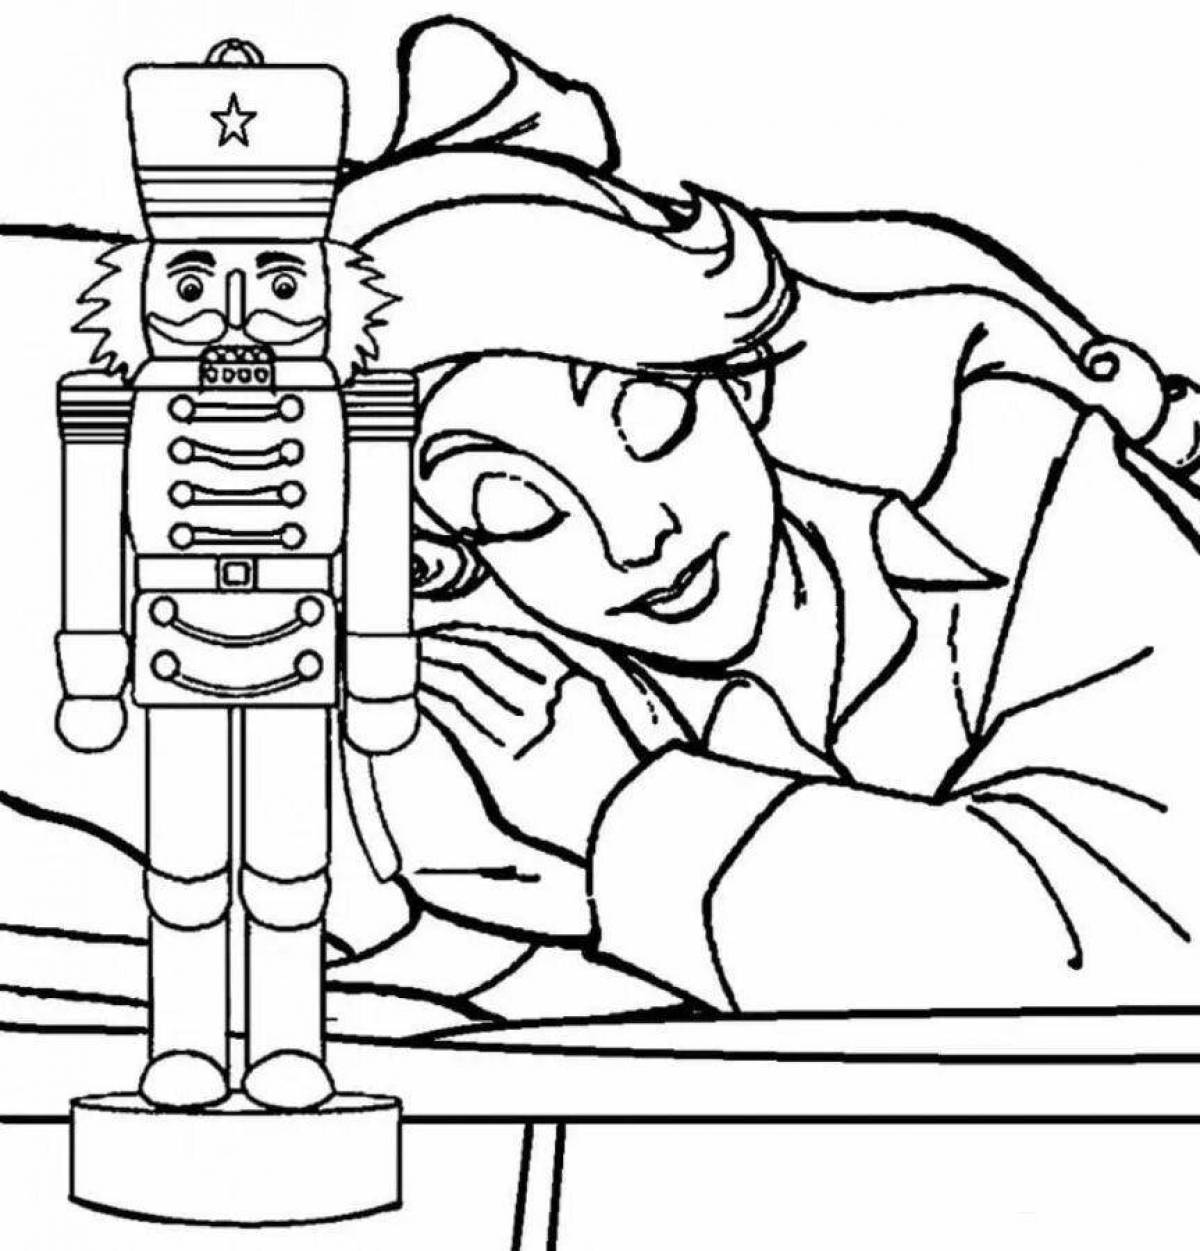 Nutcracker and Mouse King coloring page in bright colors